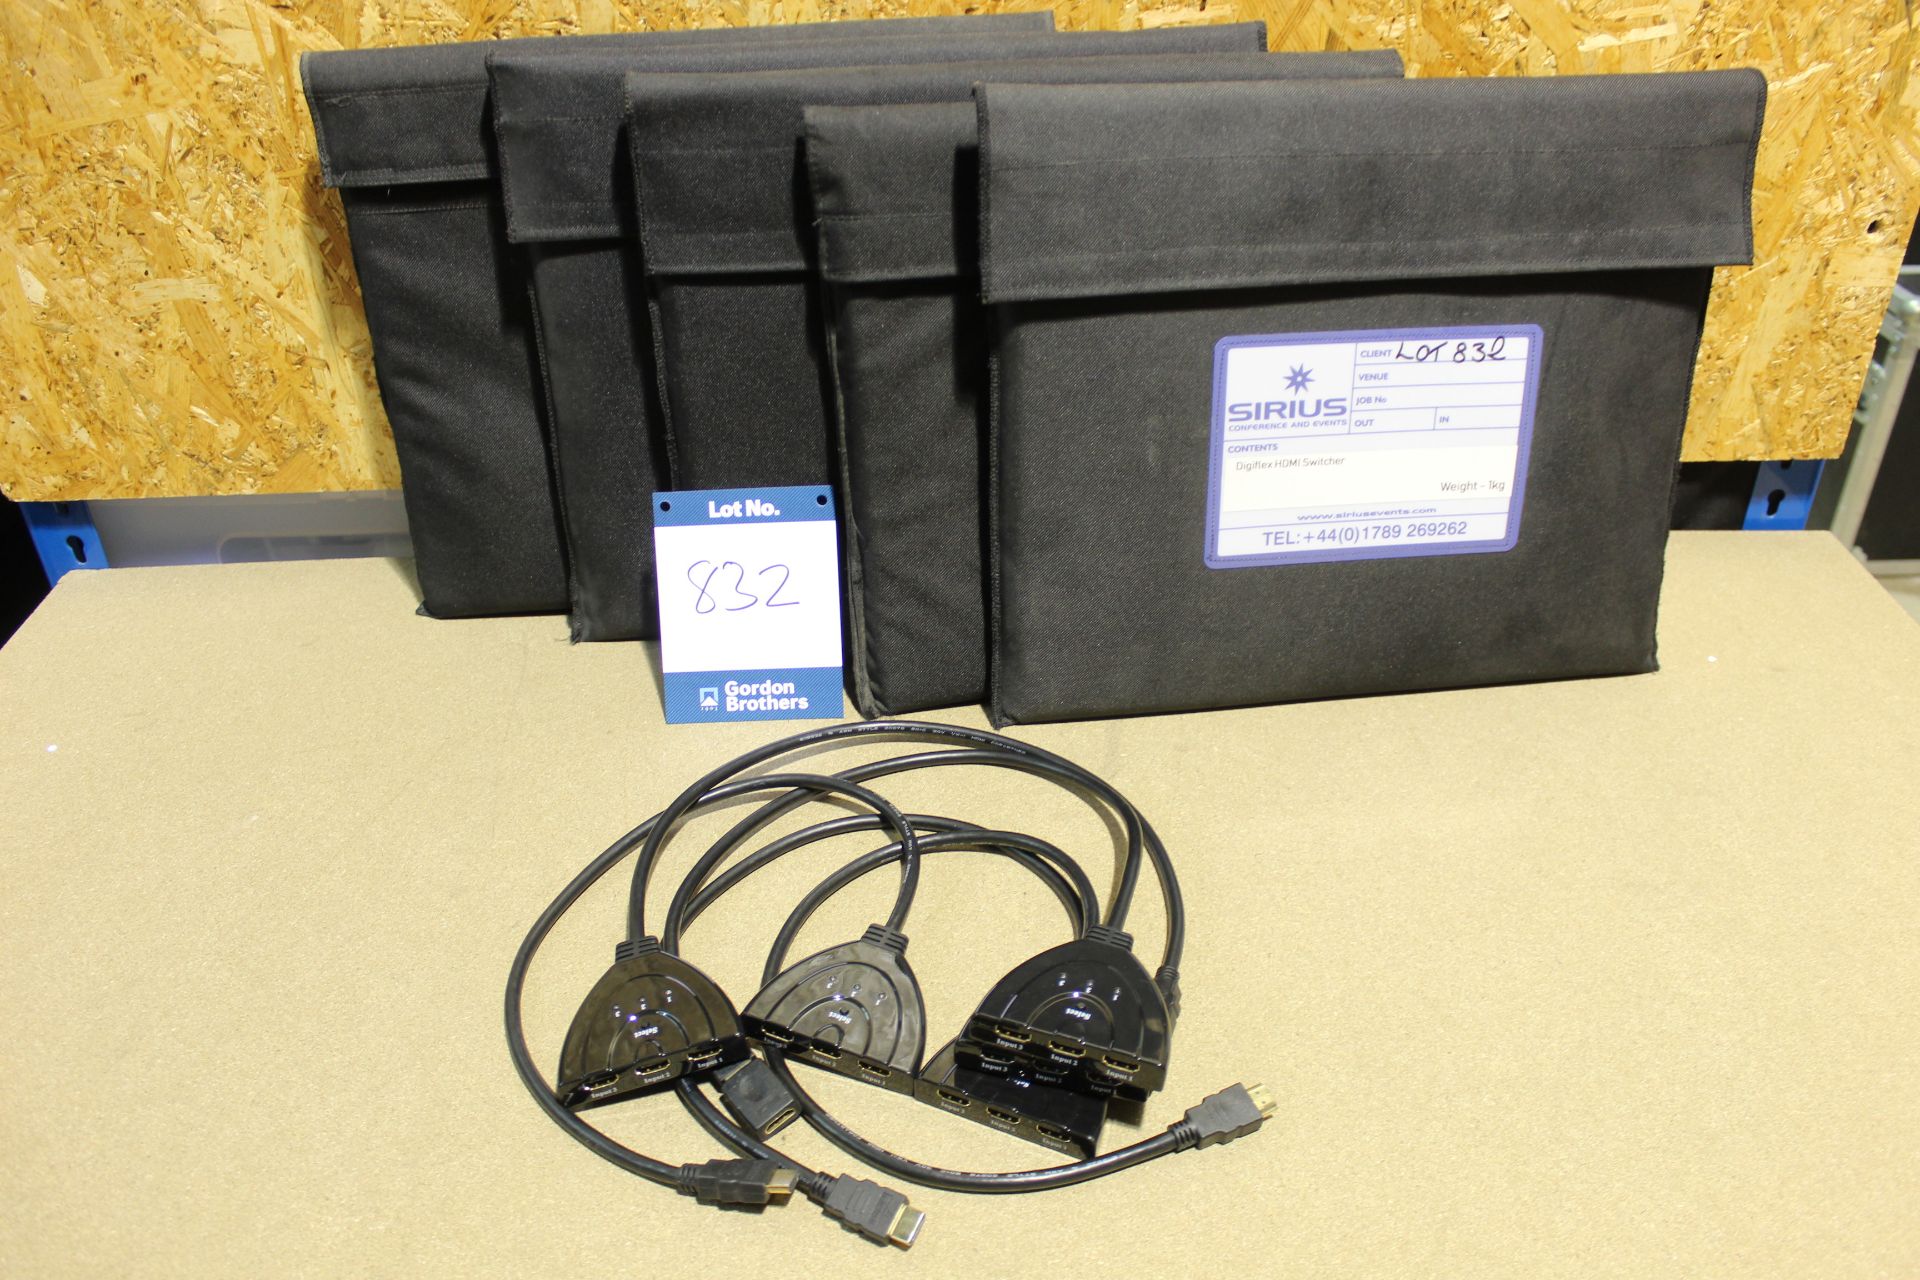 5x Digiflex HDMI 3 way switchers each in carry case (Purchased in 2013). Weight: 1kg each